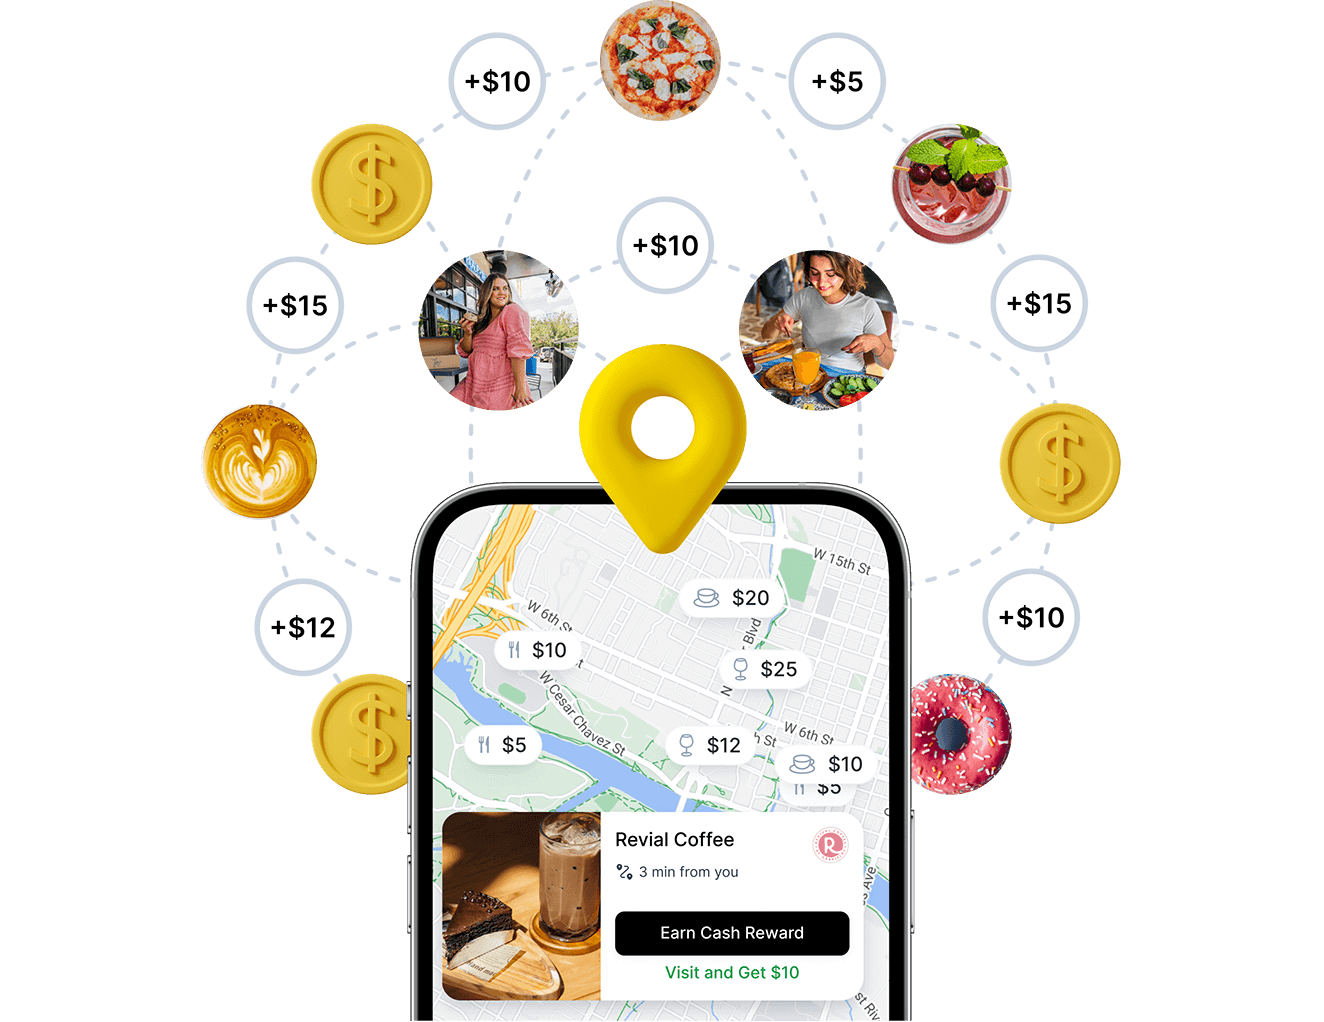 get rewards for visiting your favorite places nearby